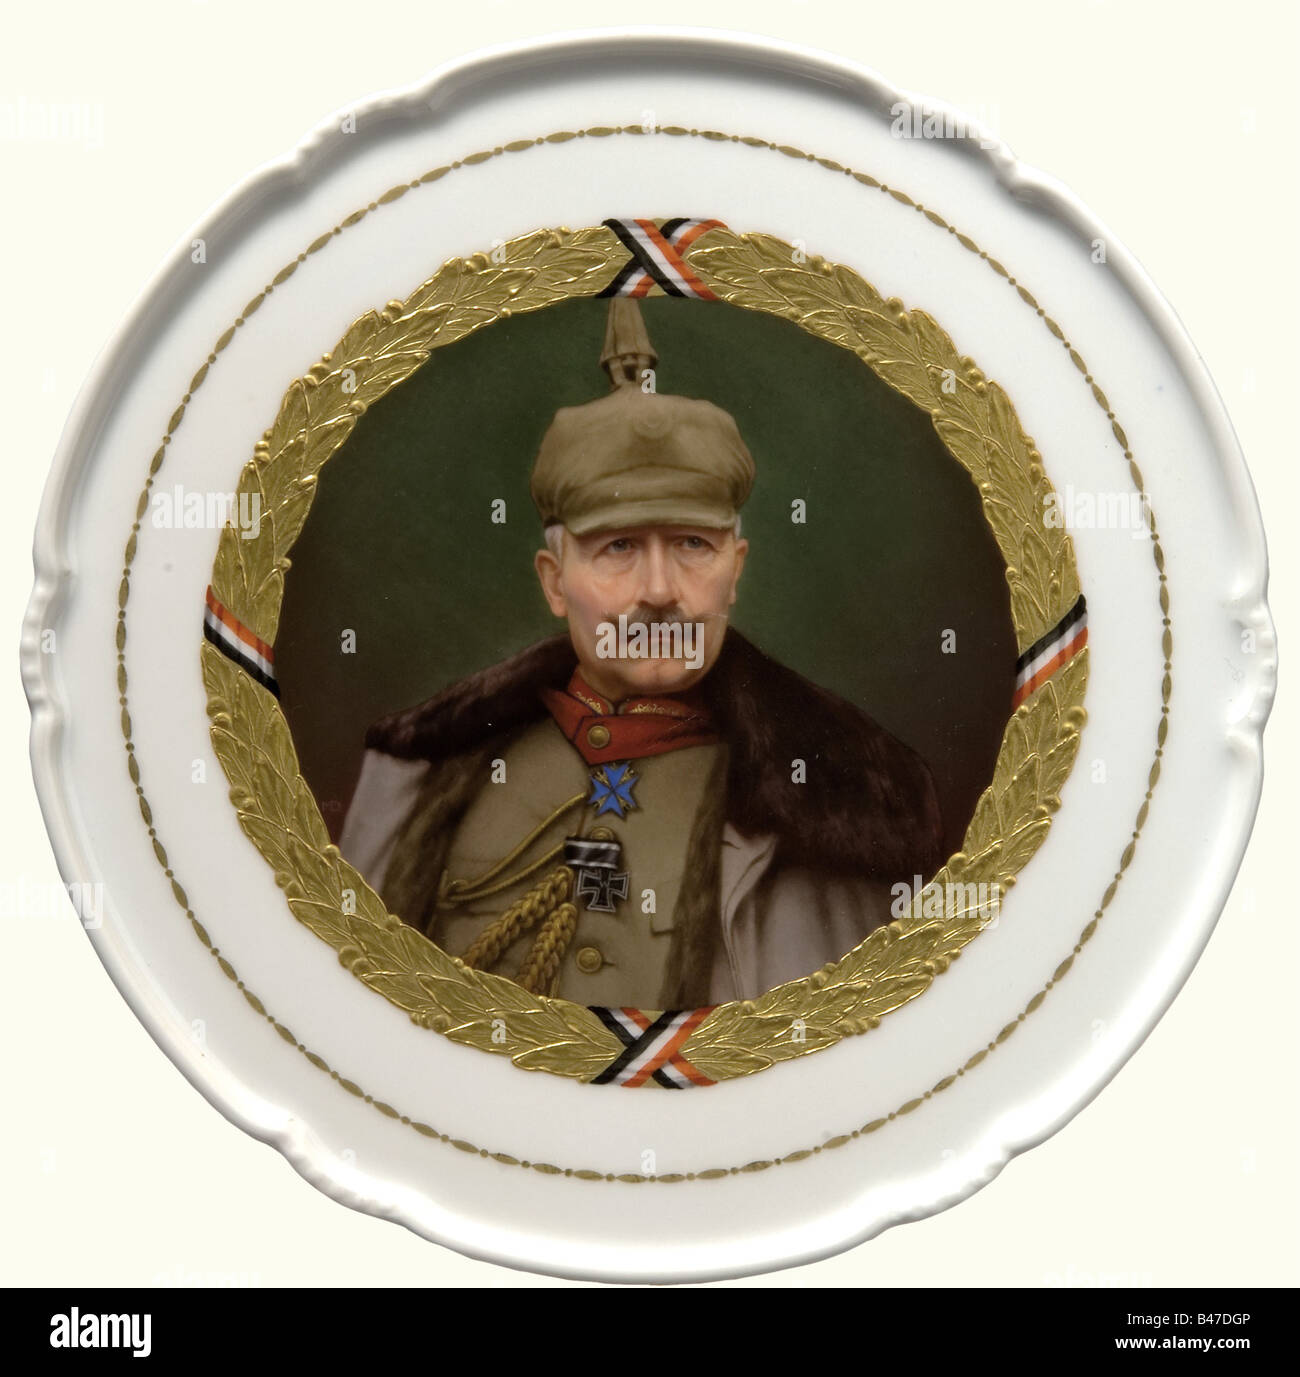 Kaiser Wilhelm II - a KPM plate 1917., A porcelain plate painted in colour with a curved rim and surrounding golden oak leaf decoration in relief. Kaiser Wilhelm II is portrayed in the centre wearing a field grey general's uniform with helmet and overcoat. There are openings in the bottom rim for mounting on a wall, a red KPM mark, a blue scepter mark, a war mark 1914 - 18, and the artist's name, 'Max Dürschke', a painter with the KPM 1898 - 1930. Diameter 26.5 cm. people, 1910s, 20th century, Prussian, Prussia, German, Germany, militaria, military, object, obj, Stock Photo